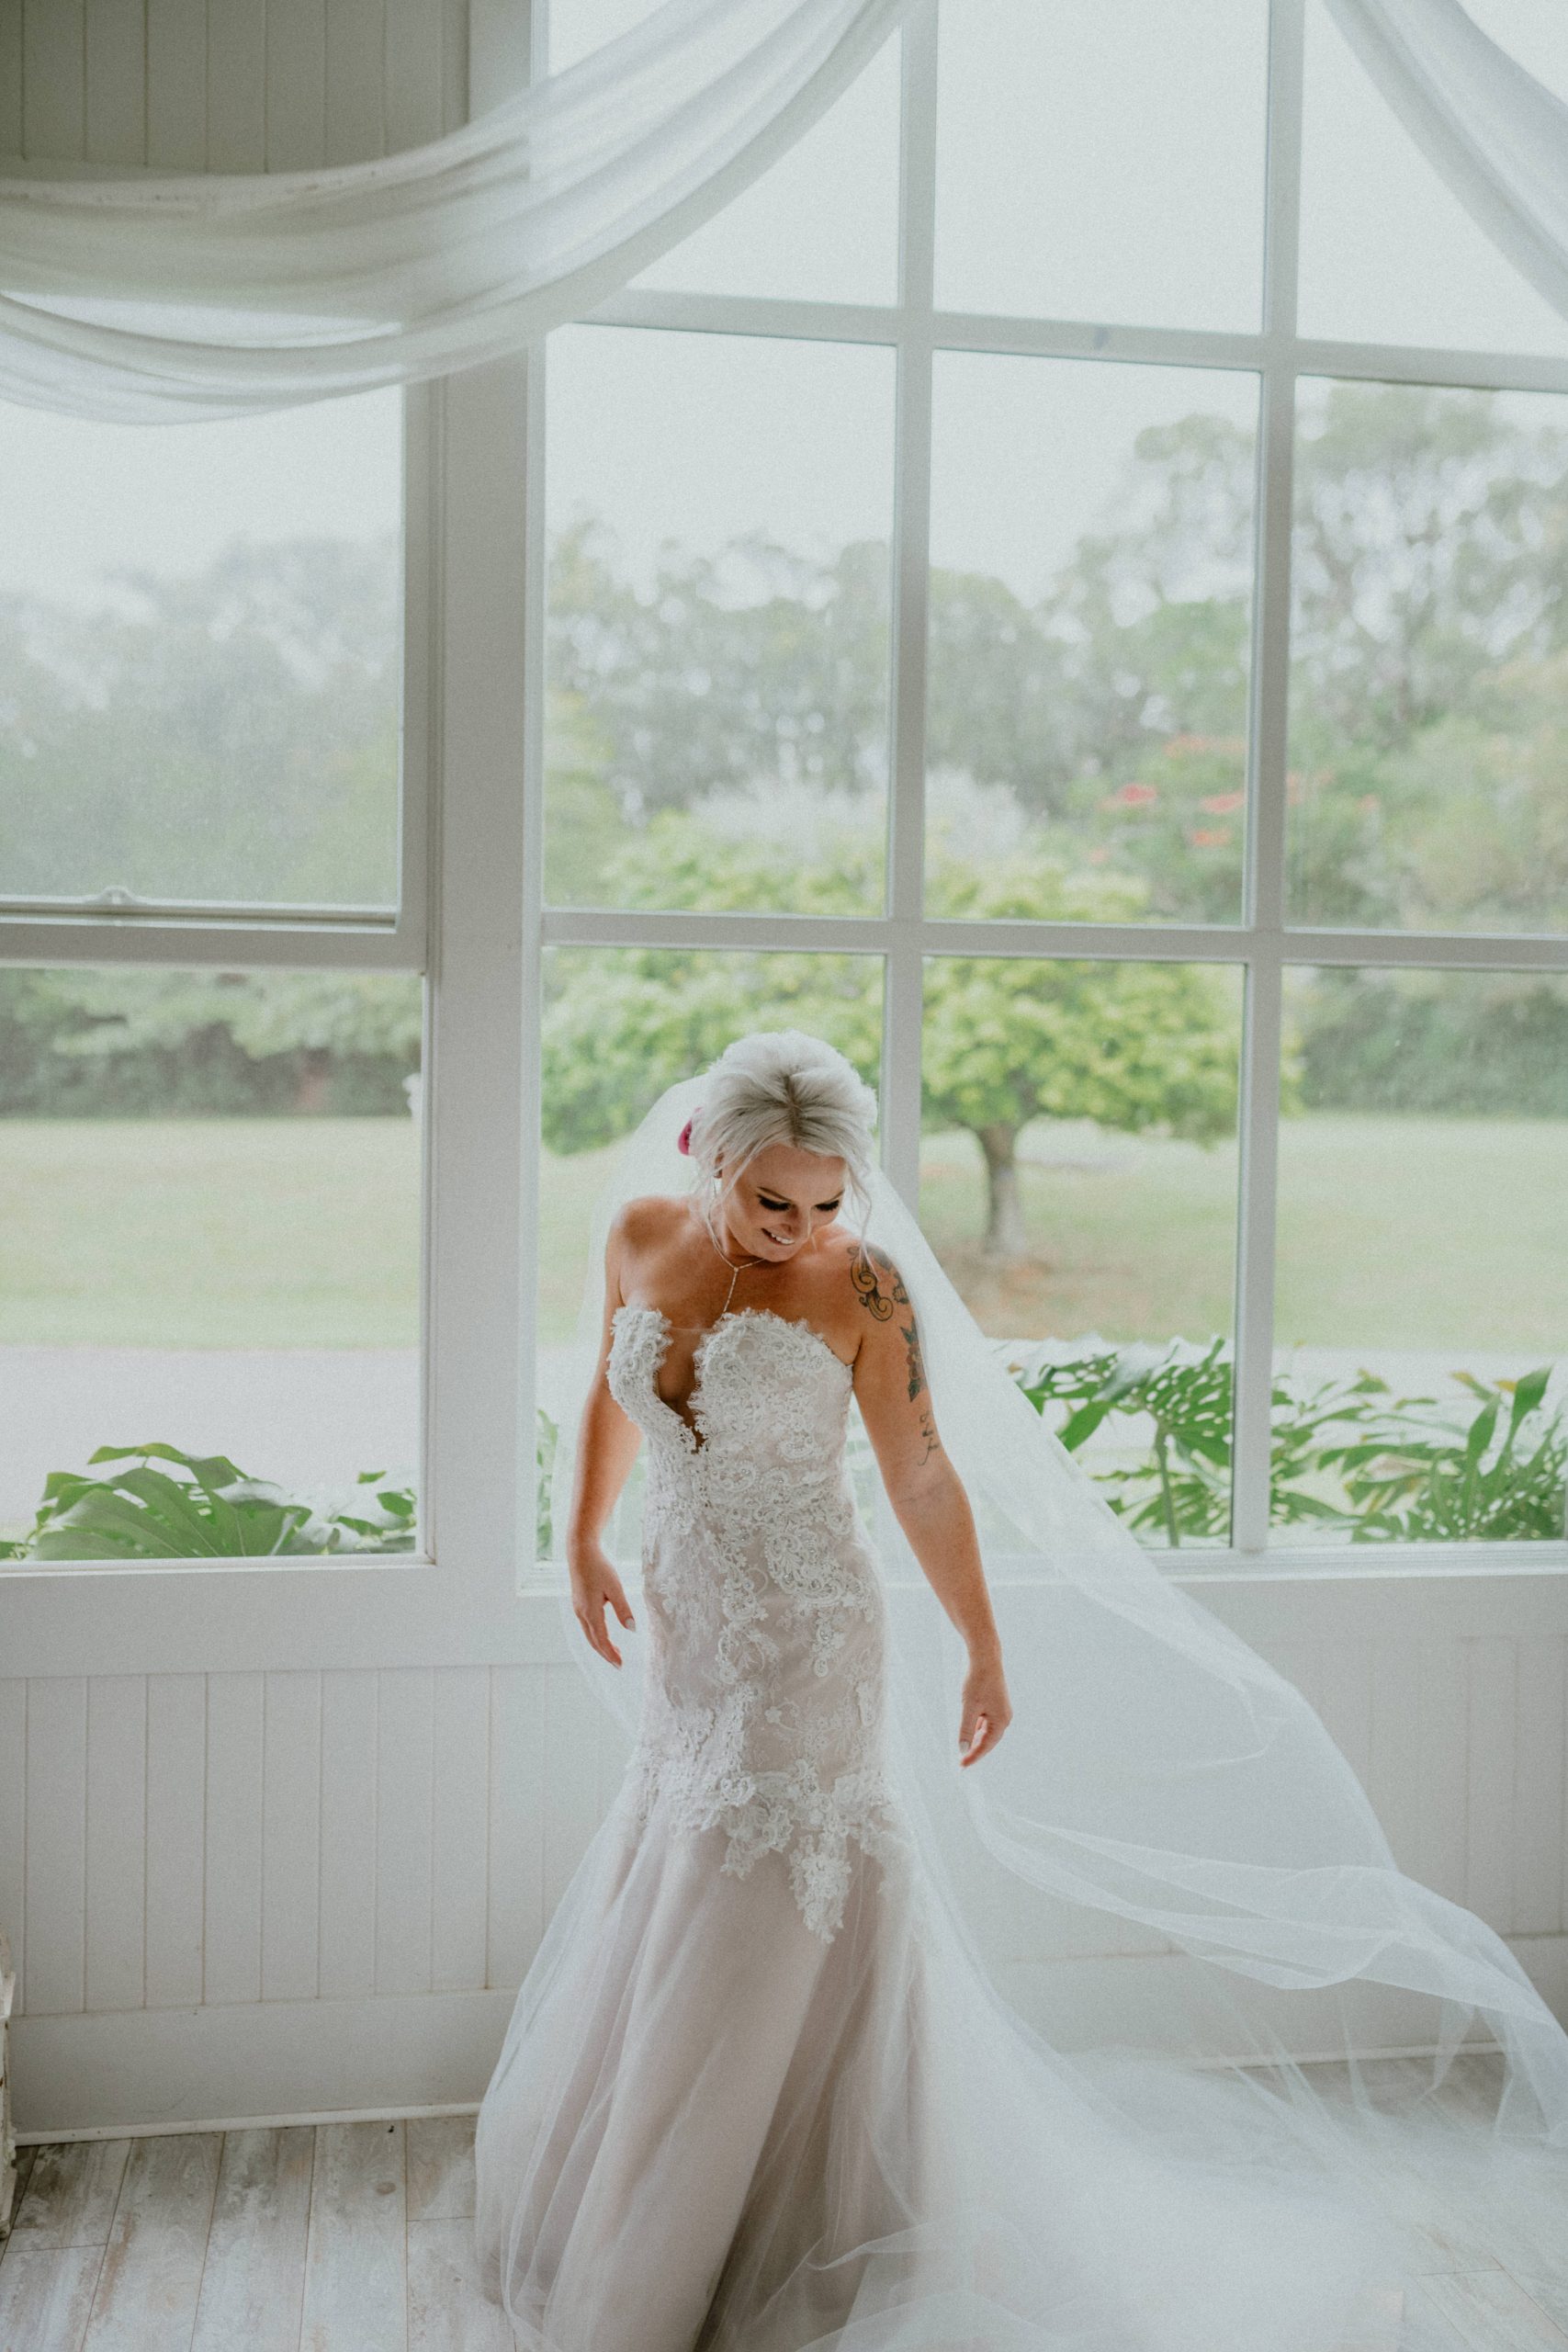 Bride in strapless wedding dress style and long tulle veil stands in front of a large window looking out at Hawaii scenery | Oahu Wedding Photographer, Oahu Elopement Photographer, Destination Wedding Photographer, Destination Elopement Photographer, Newlywed moments ideas, Newlywed Photography inspiration, Hawaii Elopement ideas | chelseaabril.com